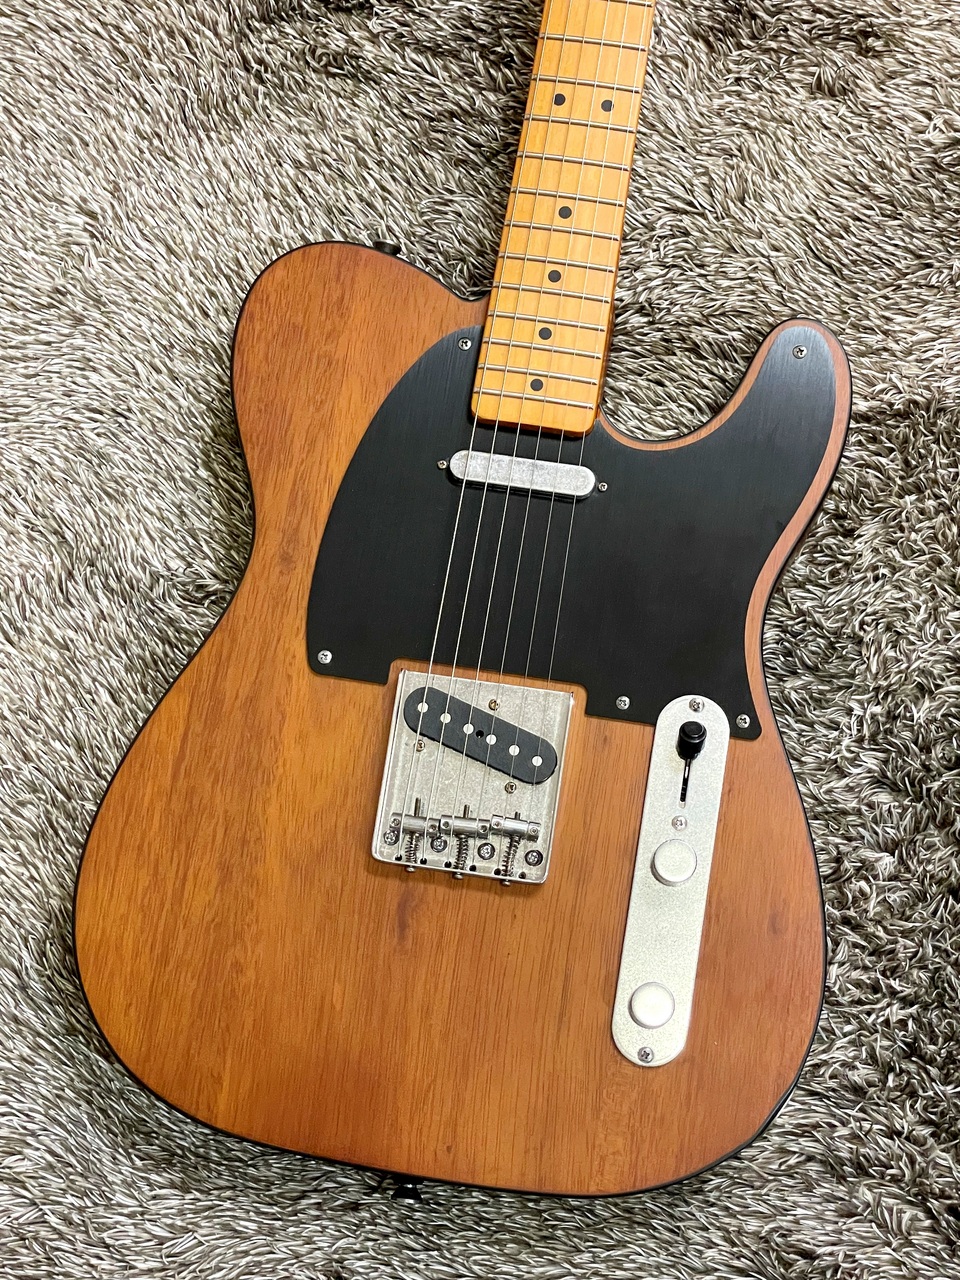 Squier by Fender 40th Anniversary Telecaster Vintage Edition Satin